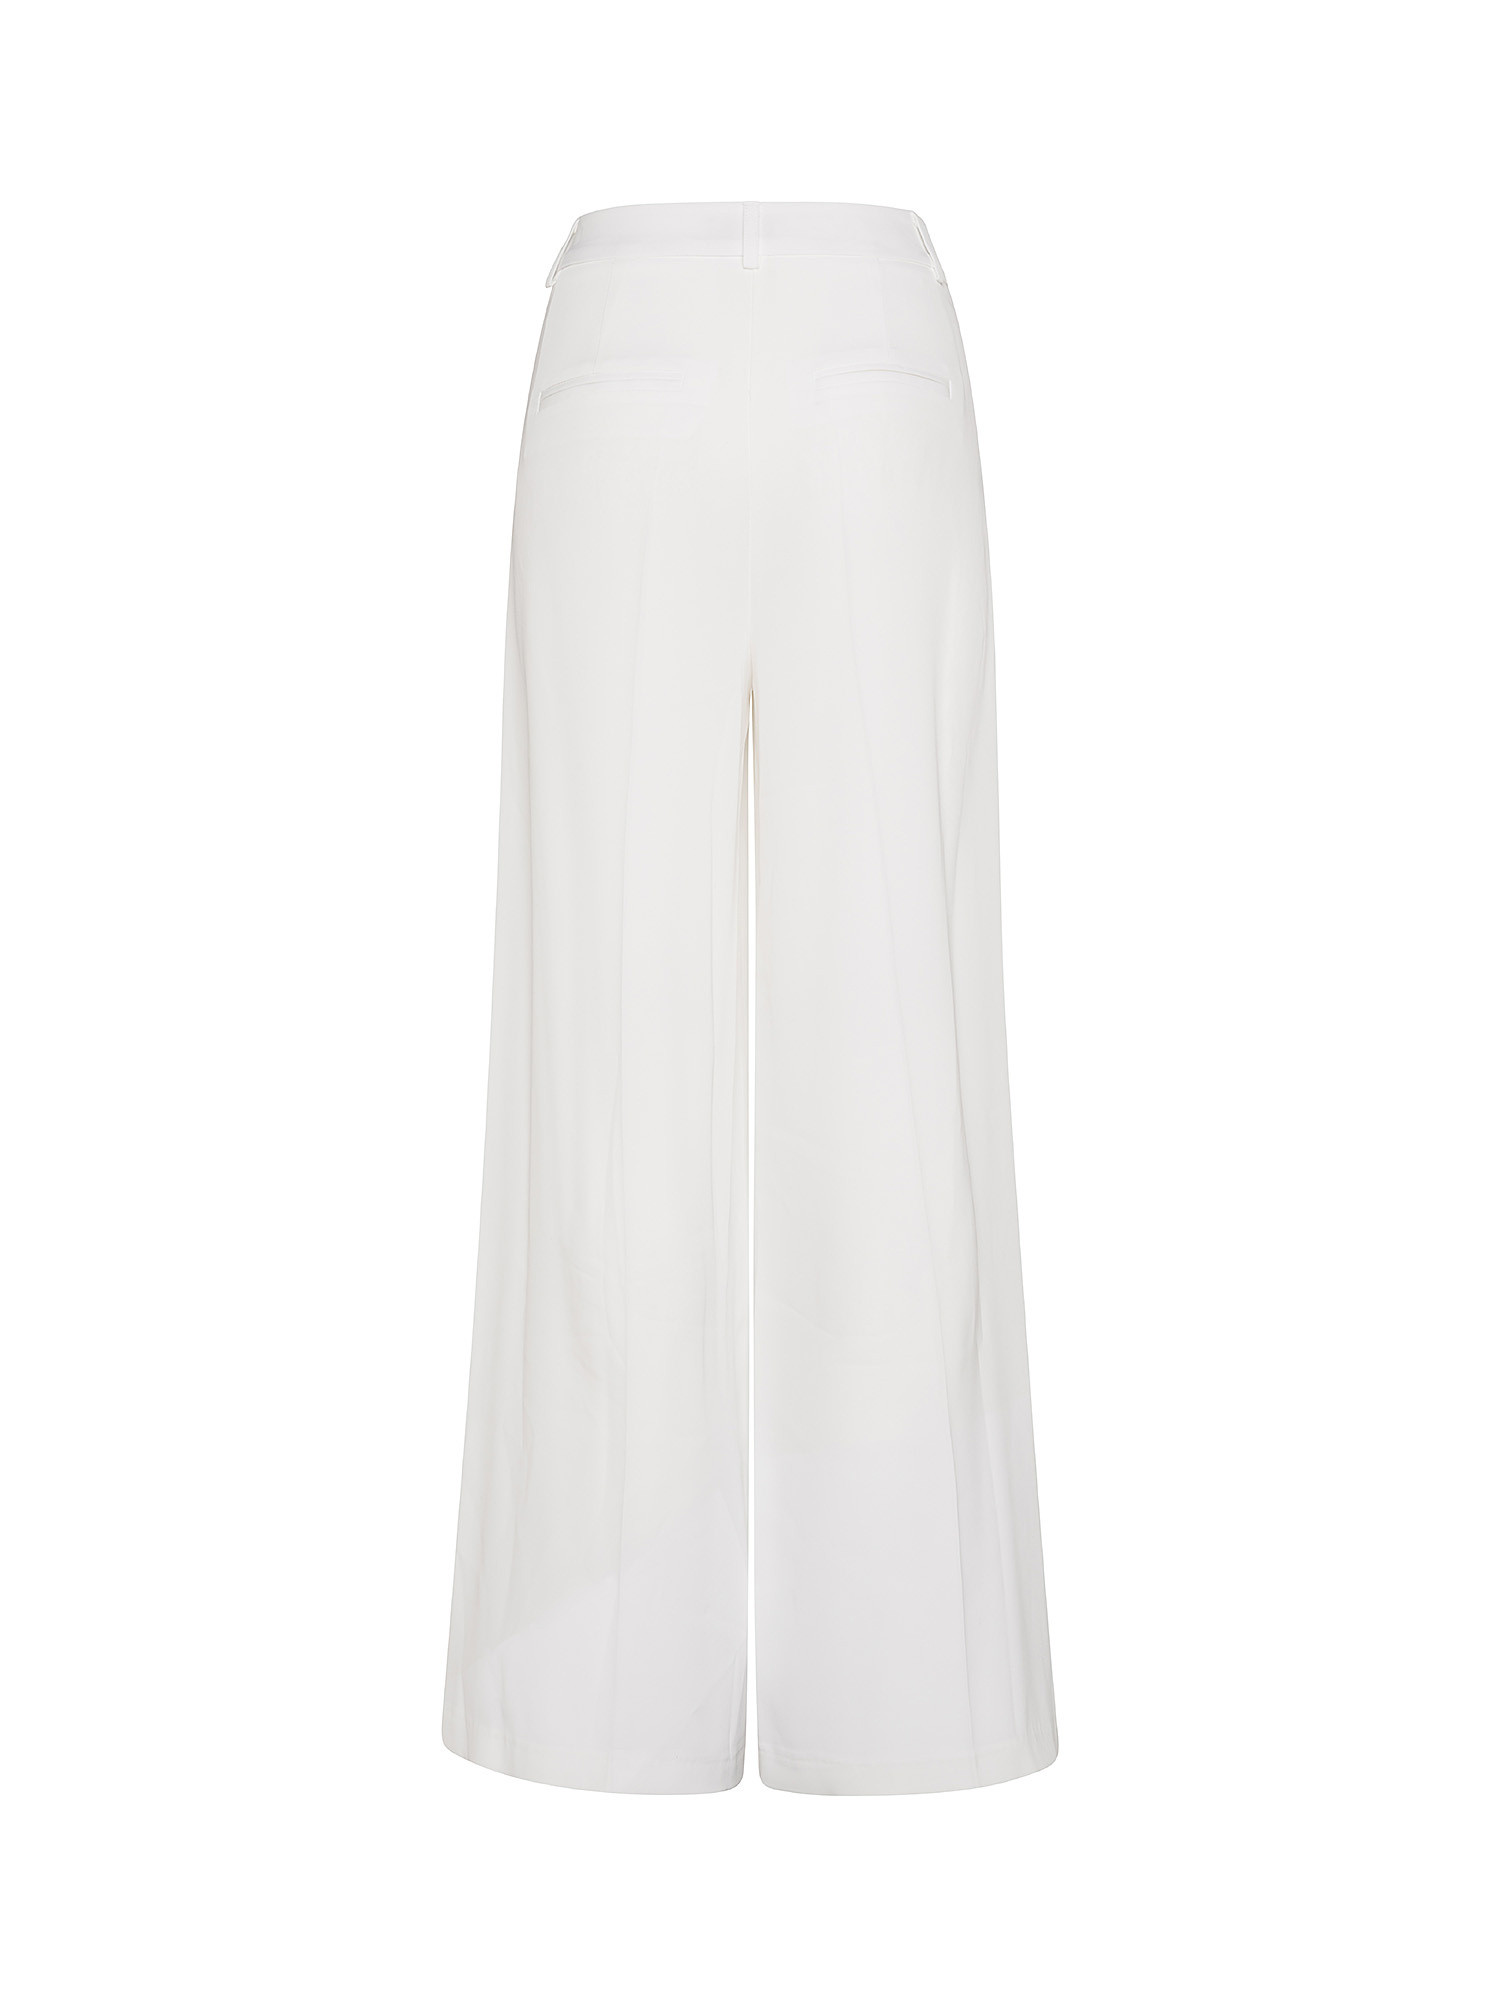 Cady trousers, White, large image number 1